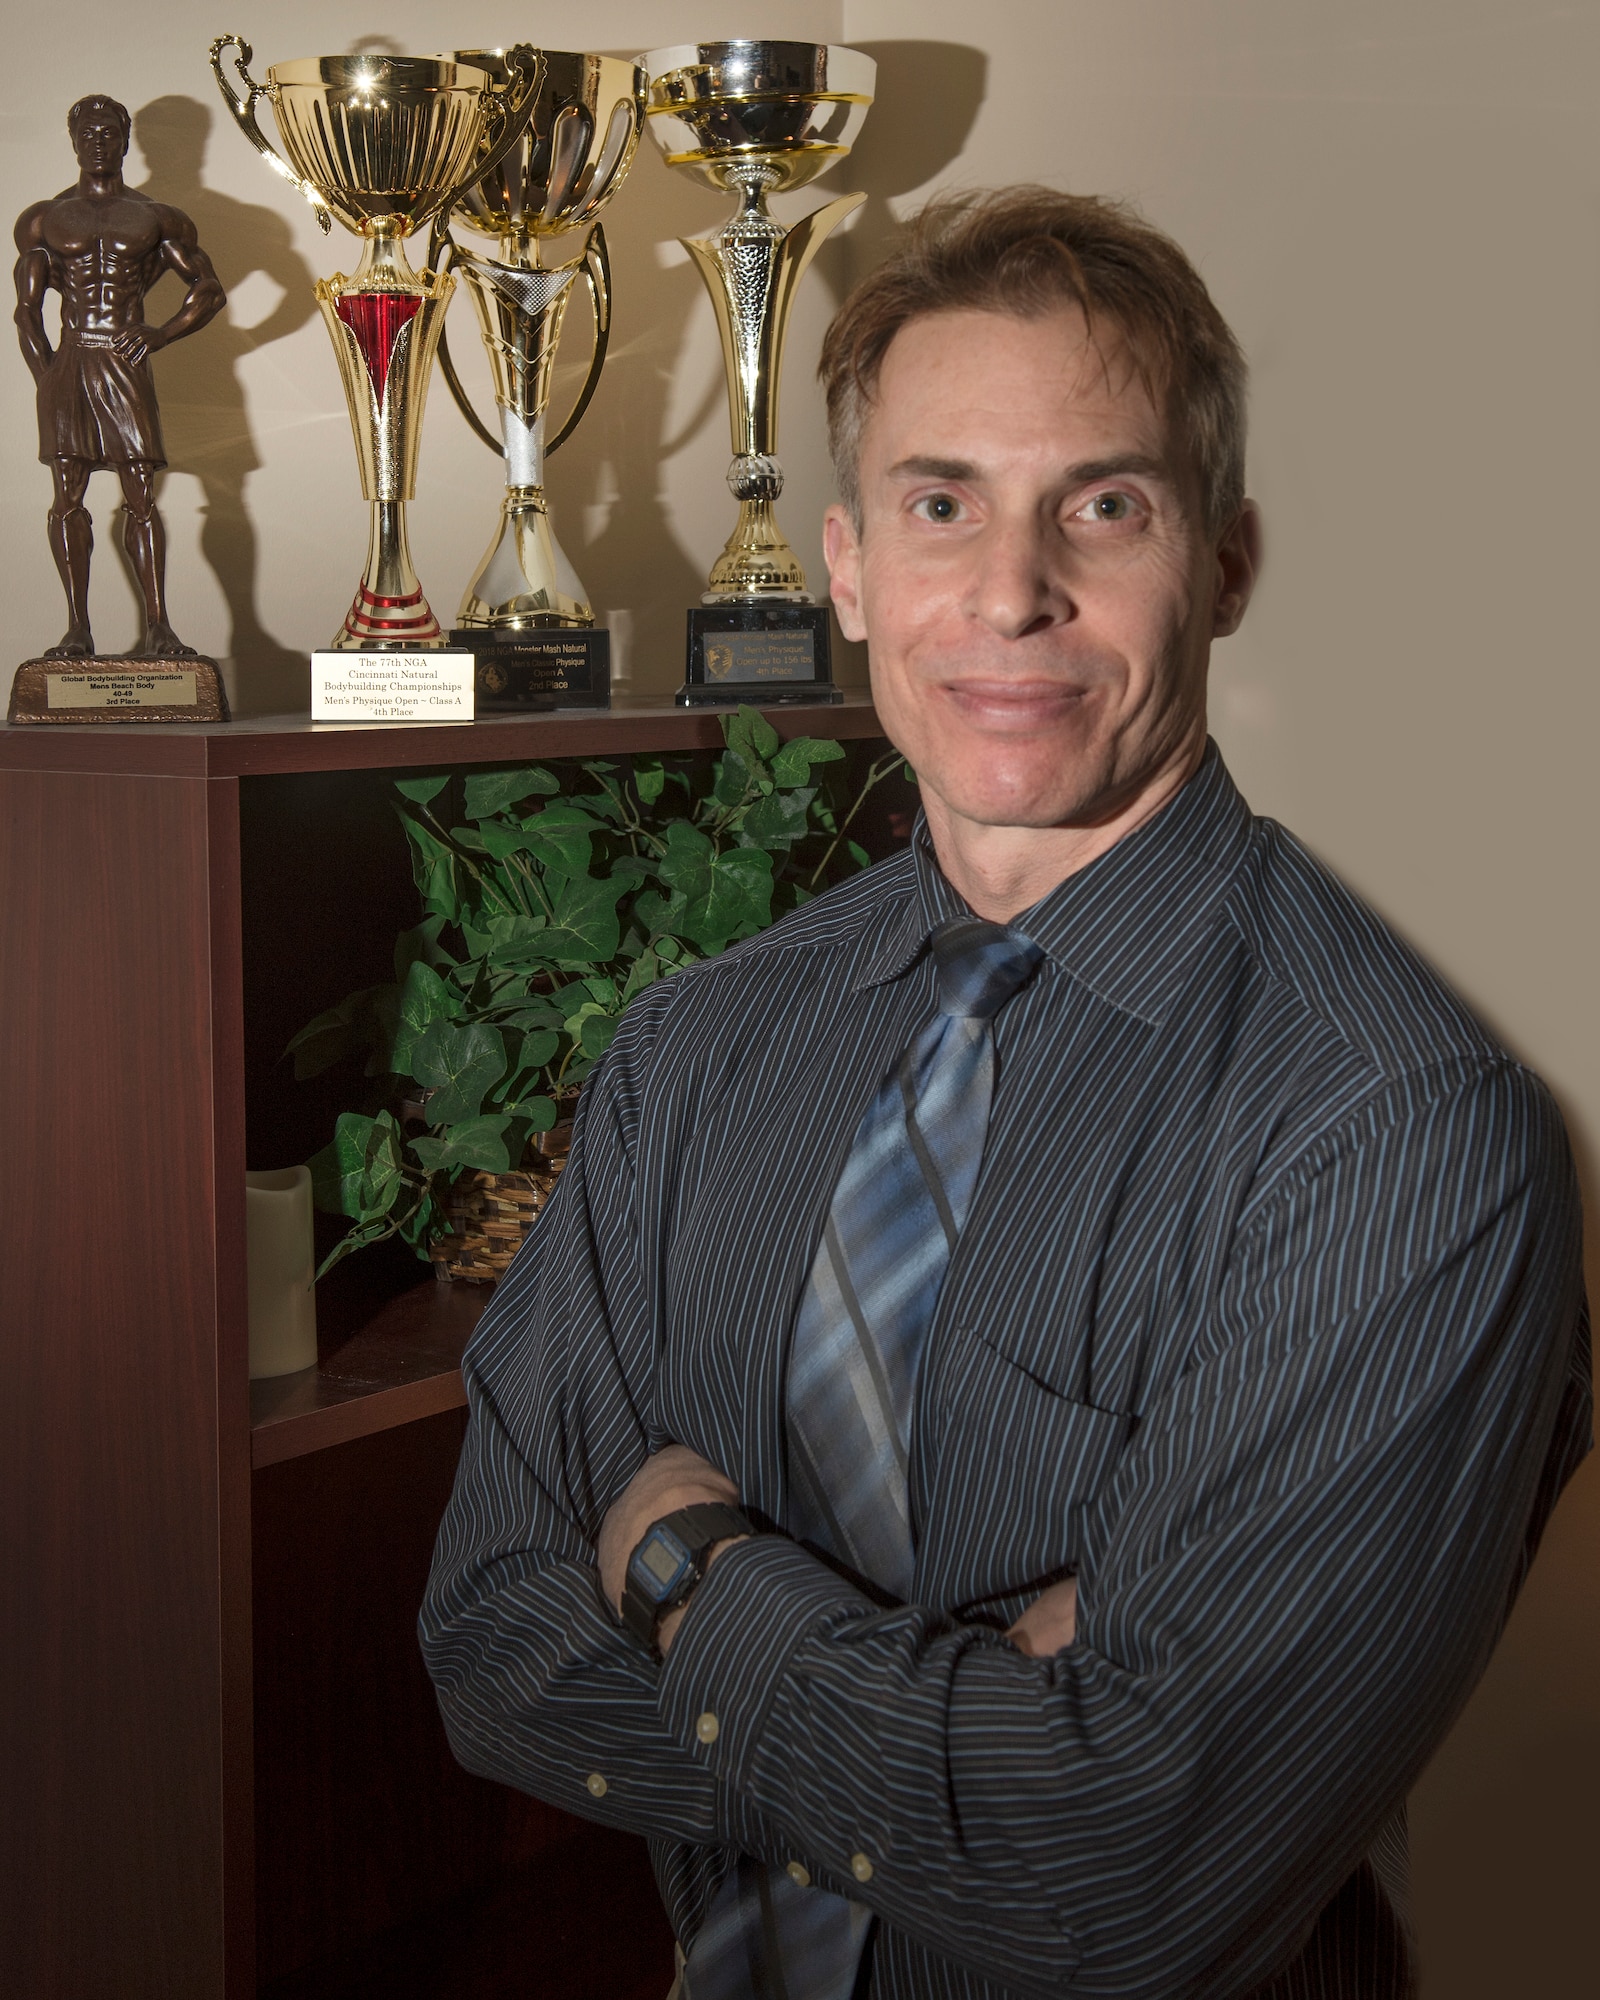 Eric Thayer, 88th Force Support Squadron Airman and Family Readiness flight chief, stands next to some of his many fitness awards inside his office at Wright-Patterson Air Force Base, Ohio, Jan. 10, 2019. Thayer has competed in several fitness competitions, such as for the Global Bodybuilding Organization and Cincinnati Natural Bodybuilding Championships. (U.S. Air Force photo by Michelle Gigante)